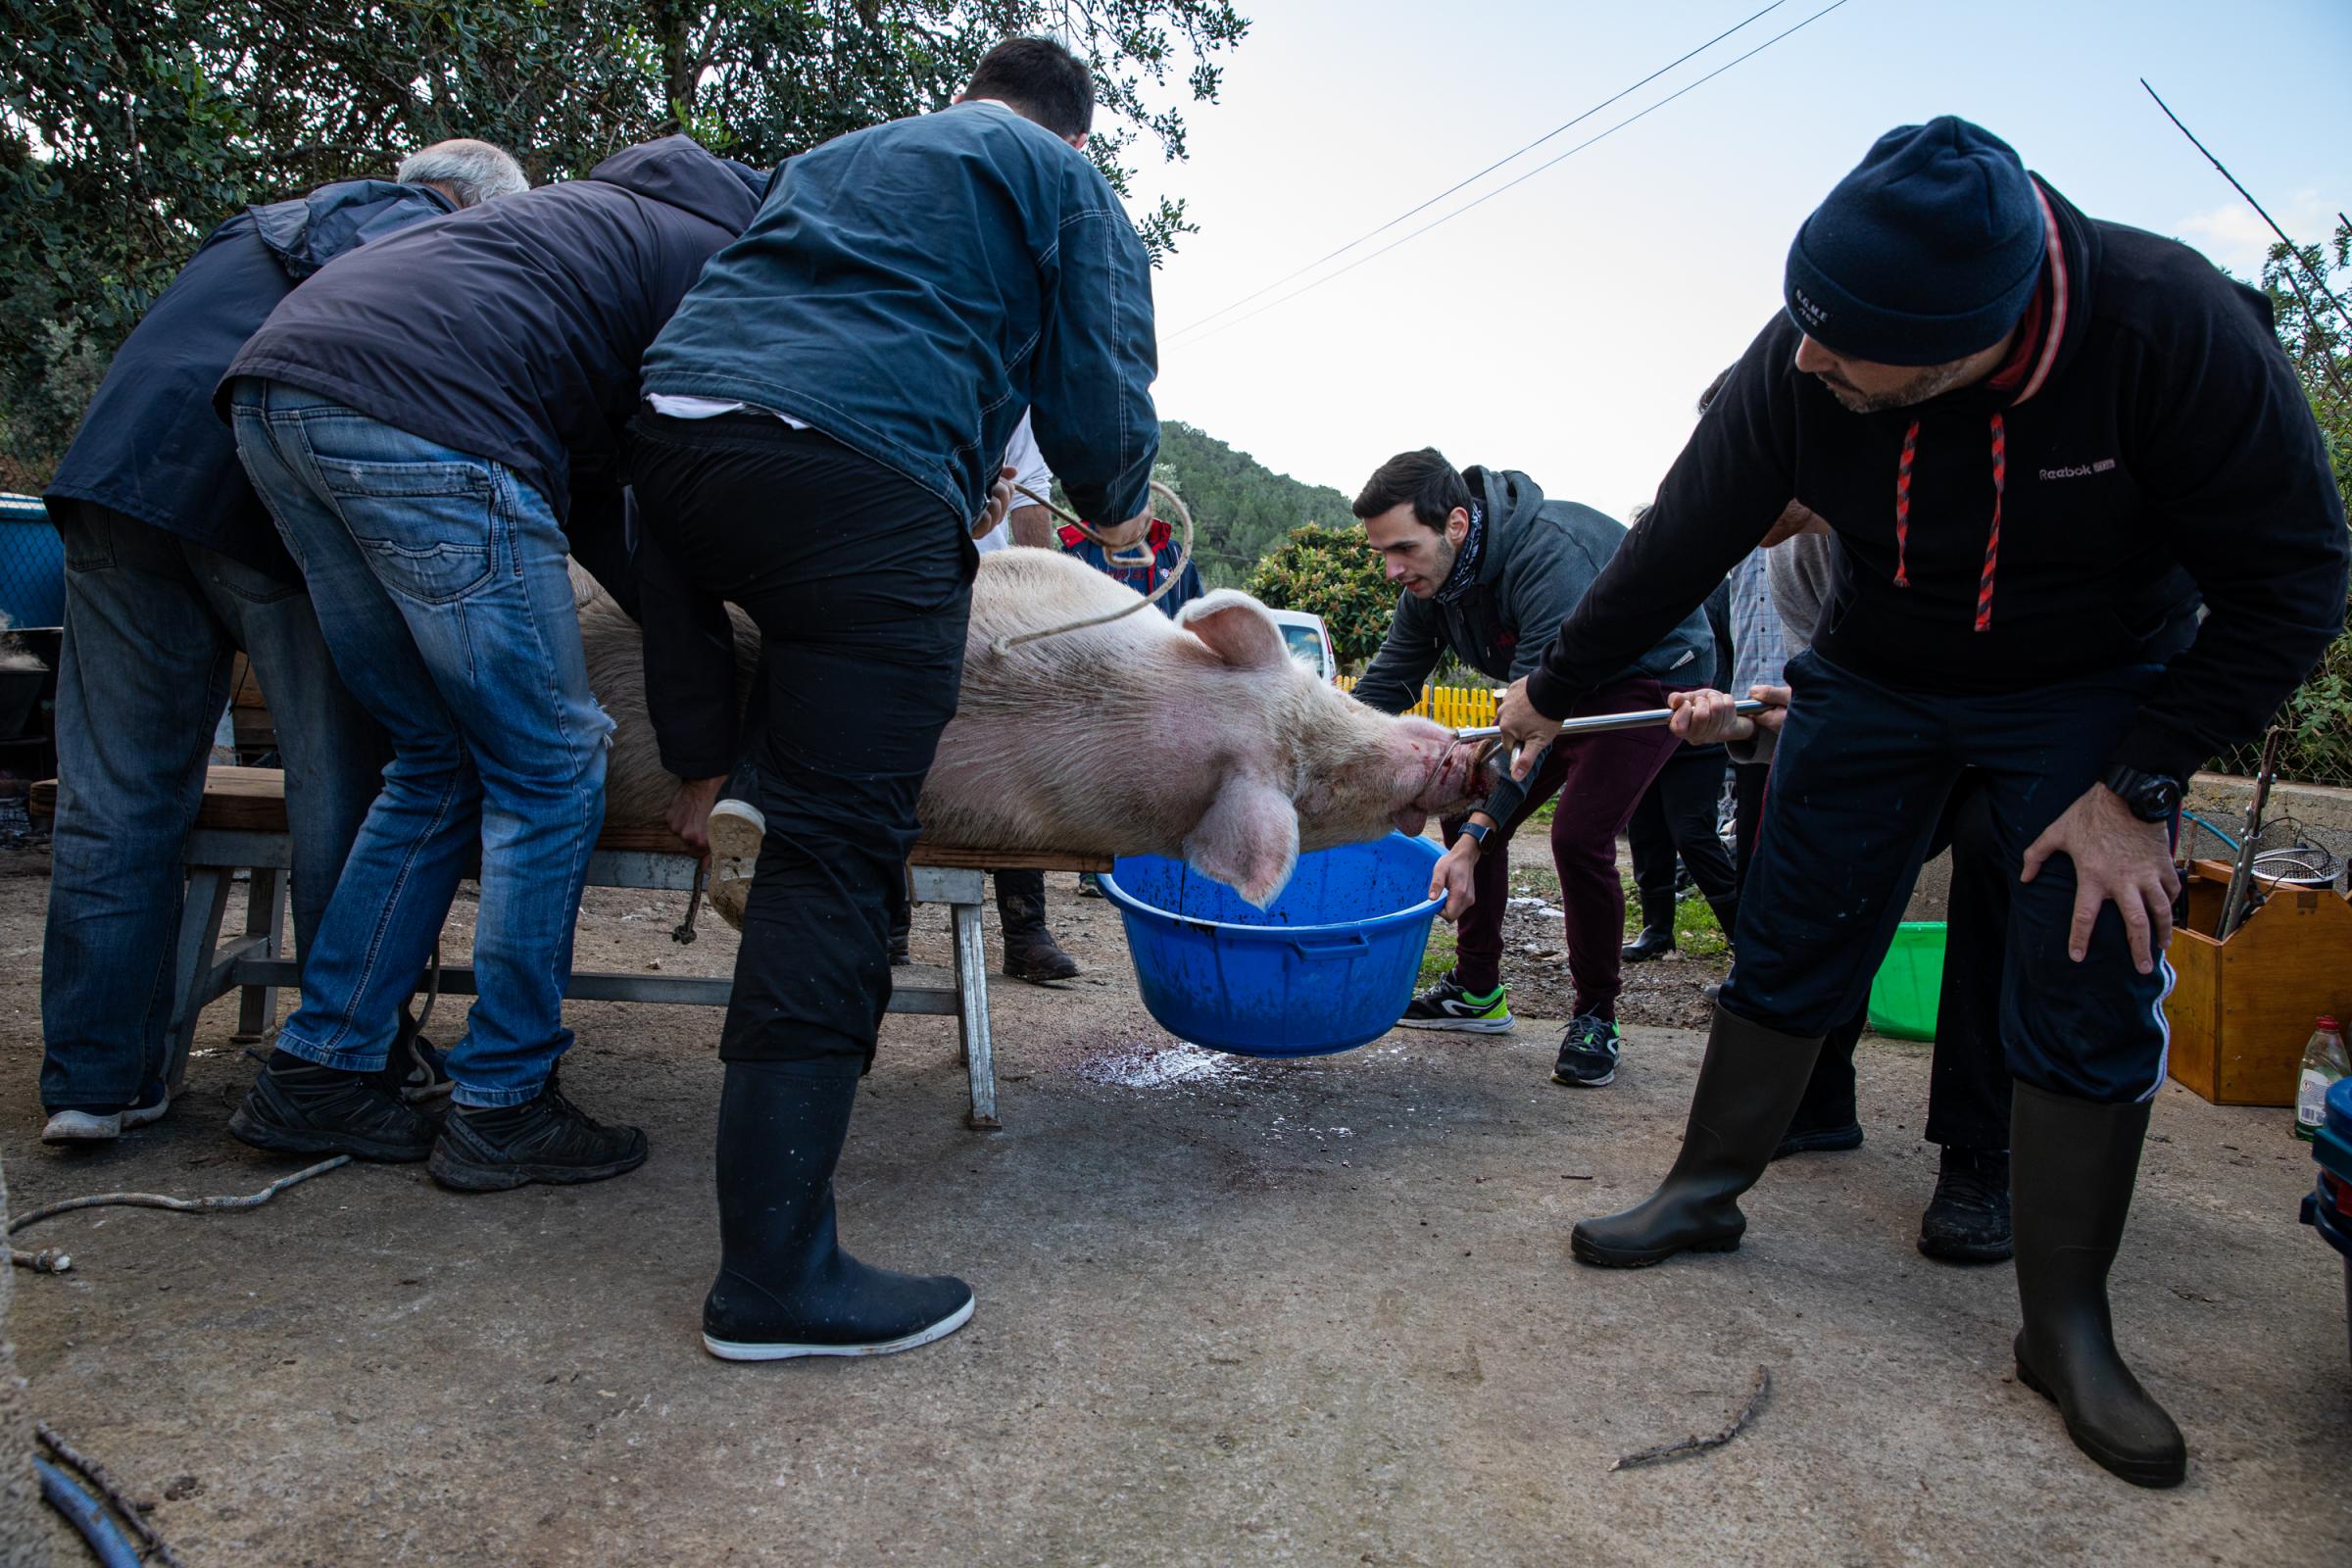 Spain's Sustainable Swine Slaughtering For Prized Iberian  - IBIZA, SPAIN - DECEMBER 06: The pig bleeds while the...